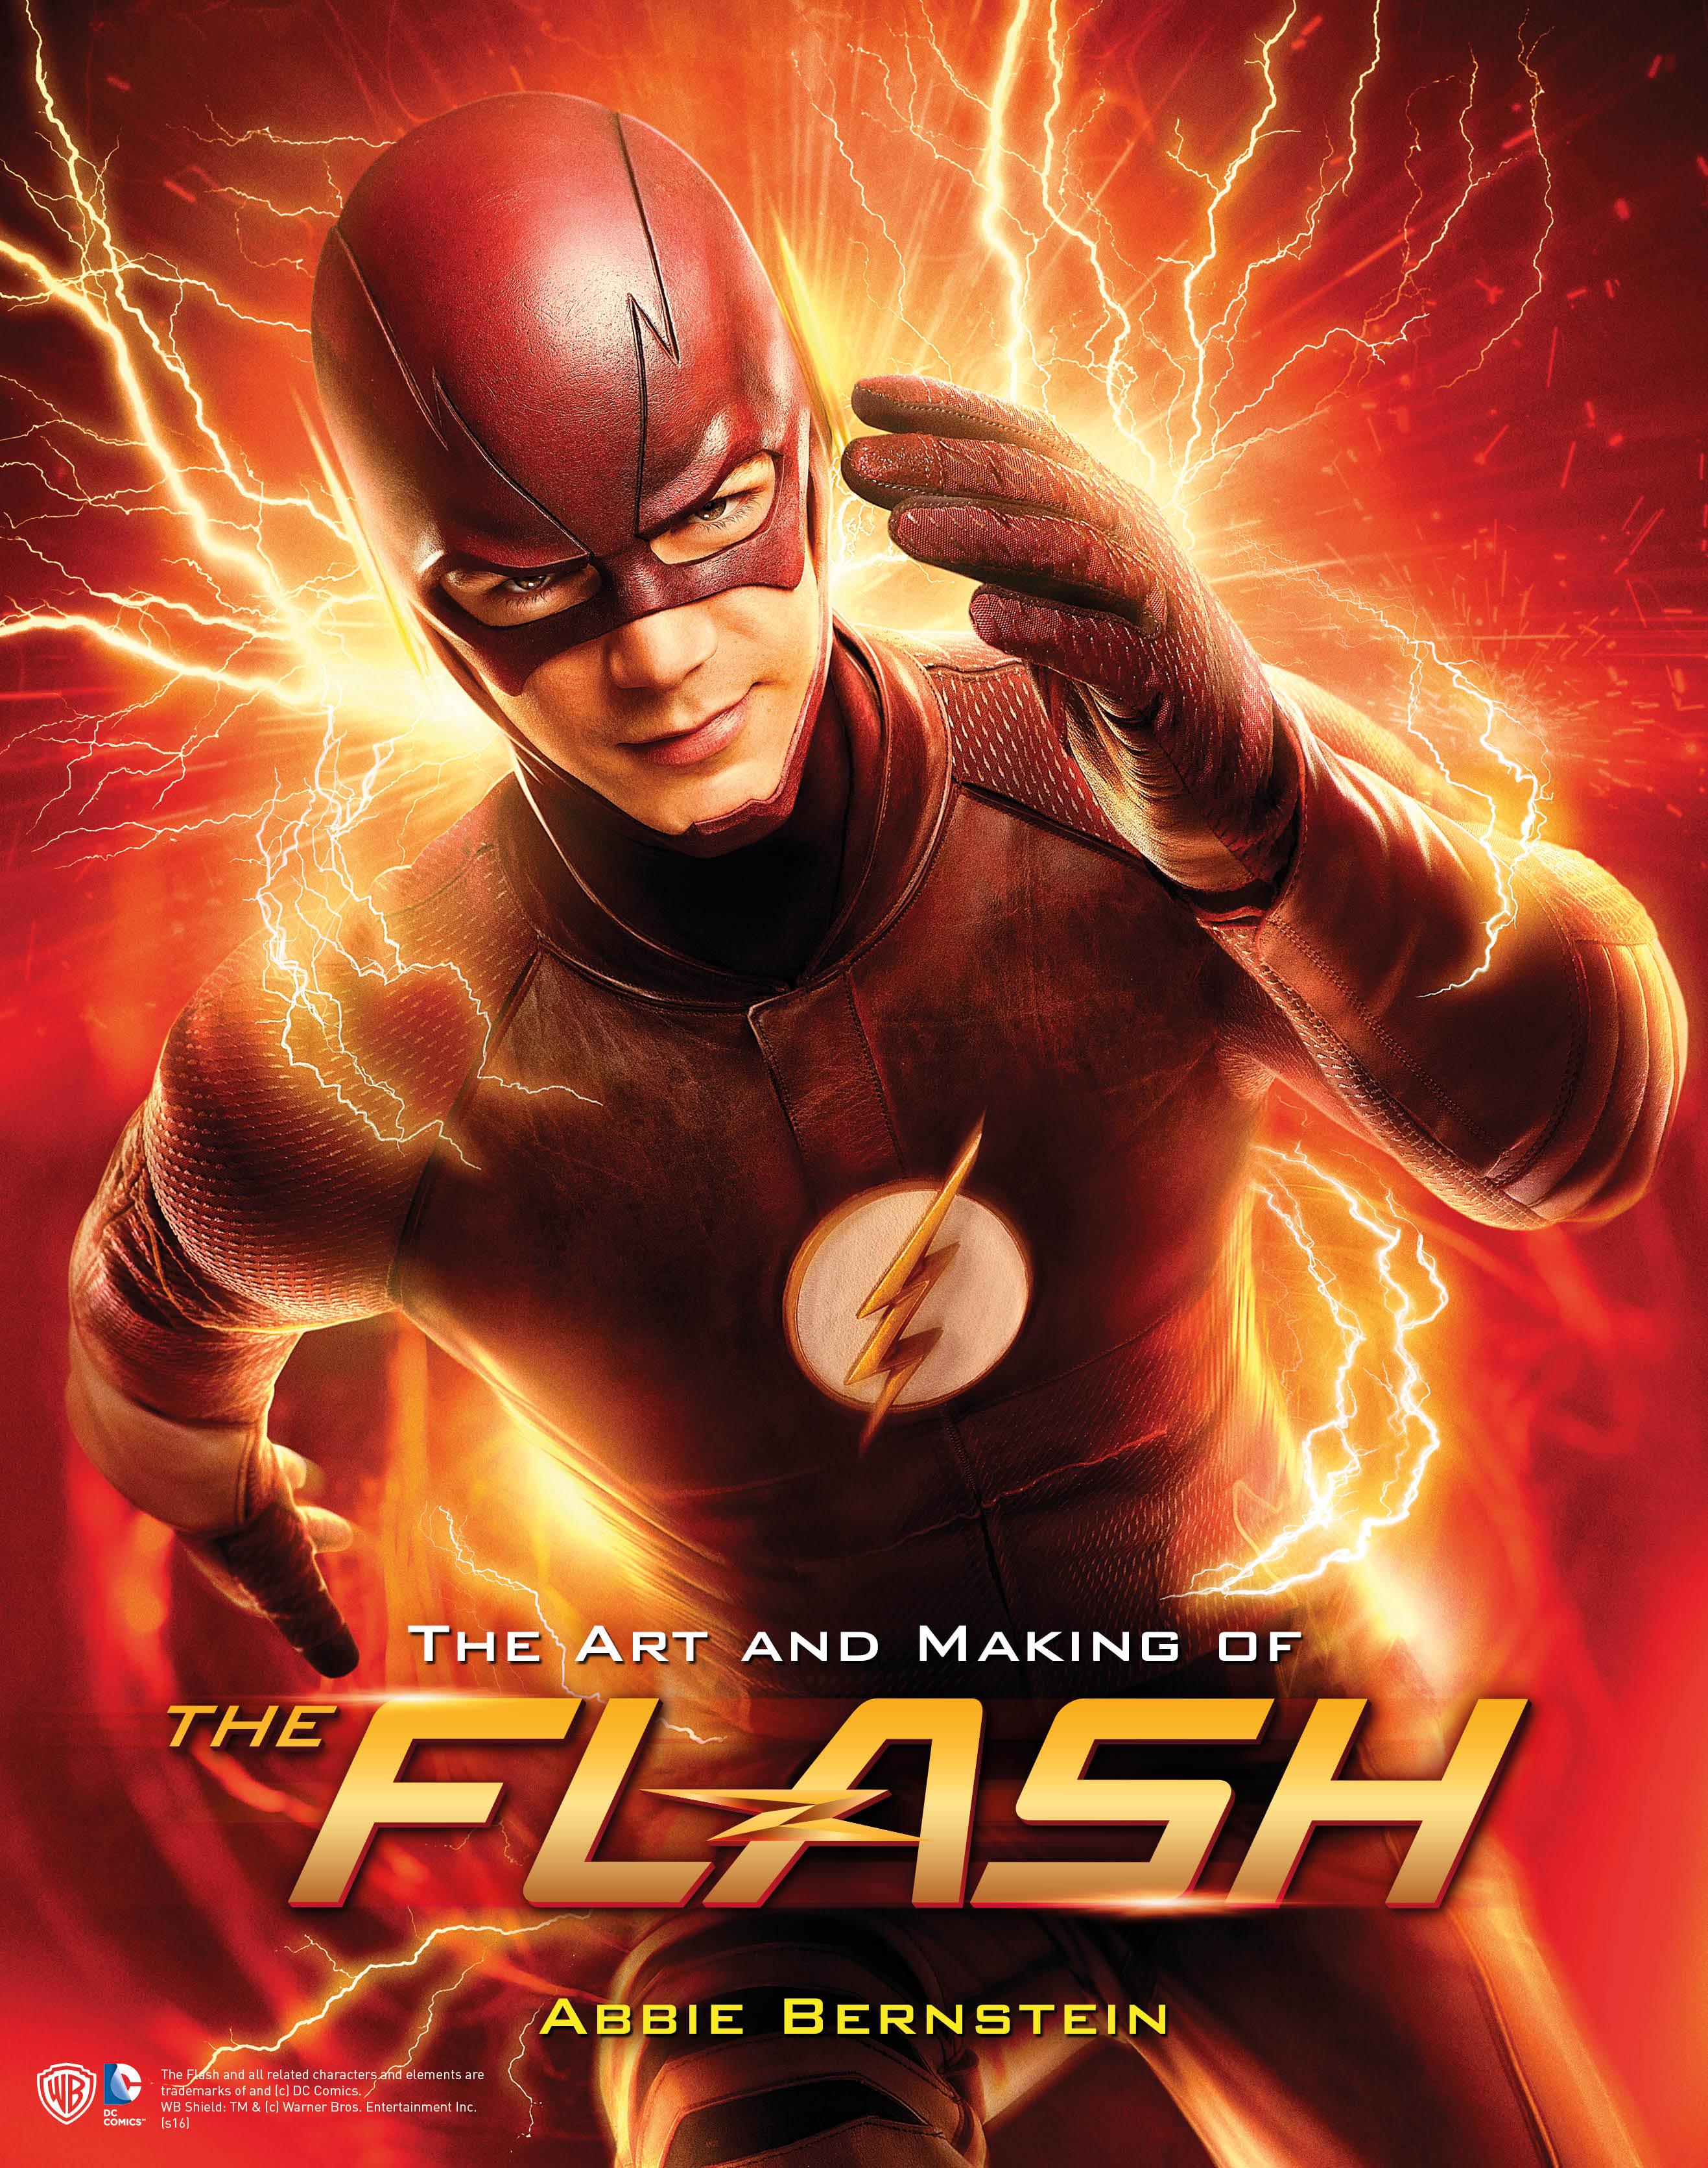 'The Art and Making of The Flash' Review